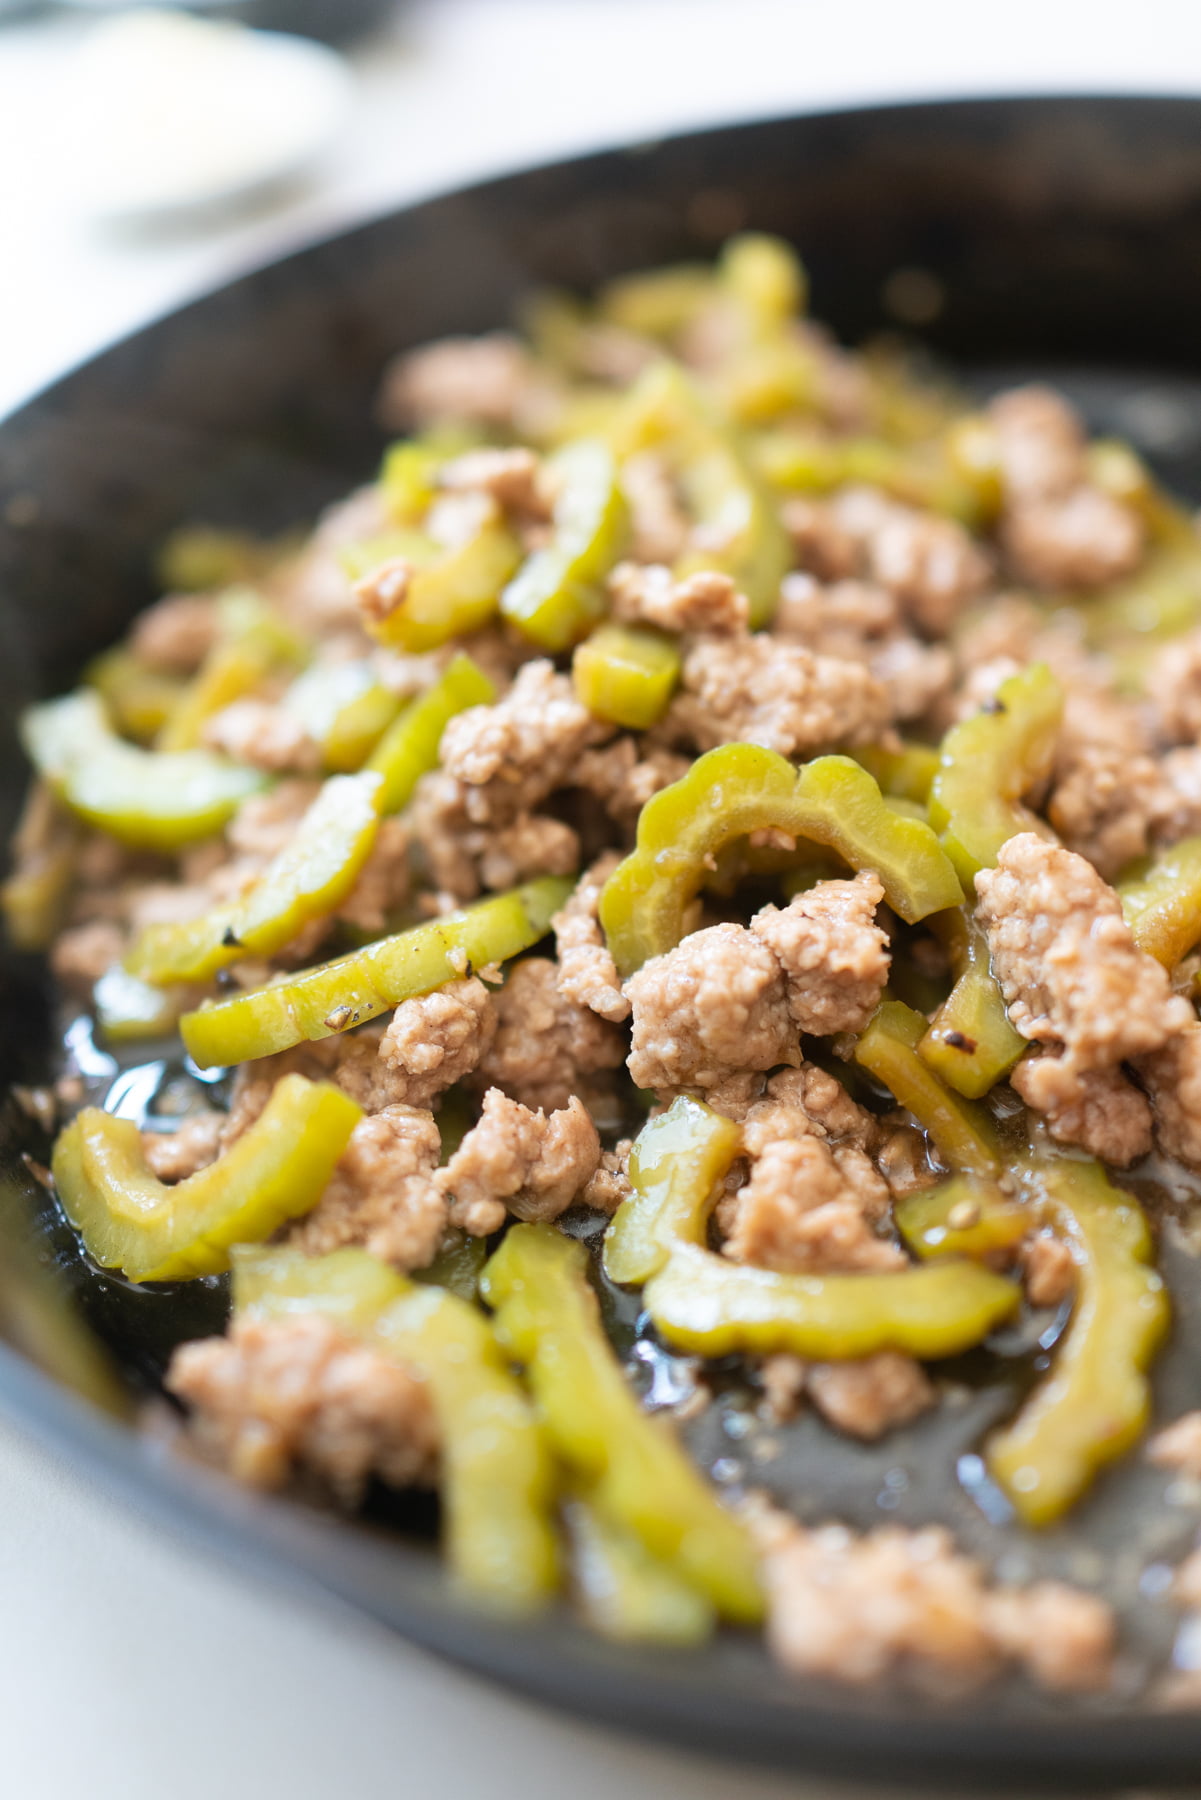 Adding sliced bitter melon to the pan with ground pork.